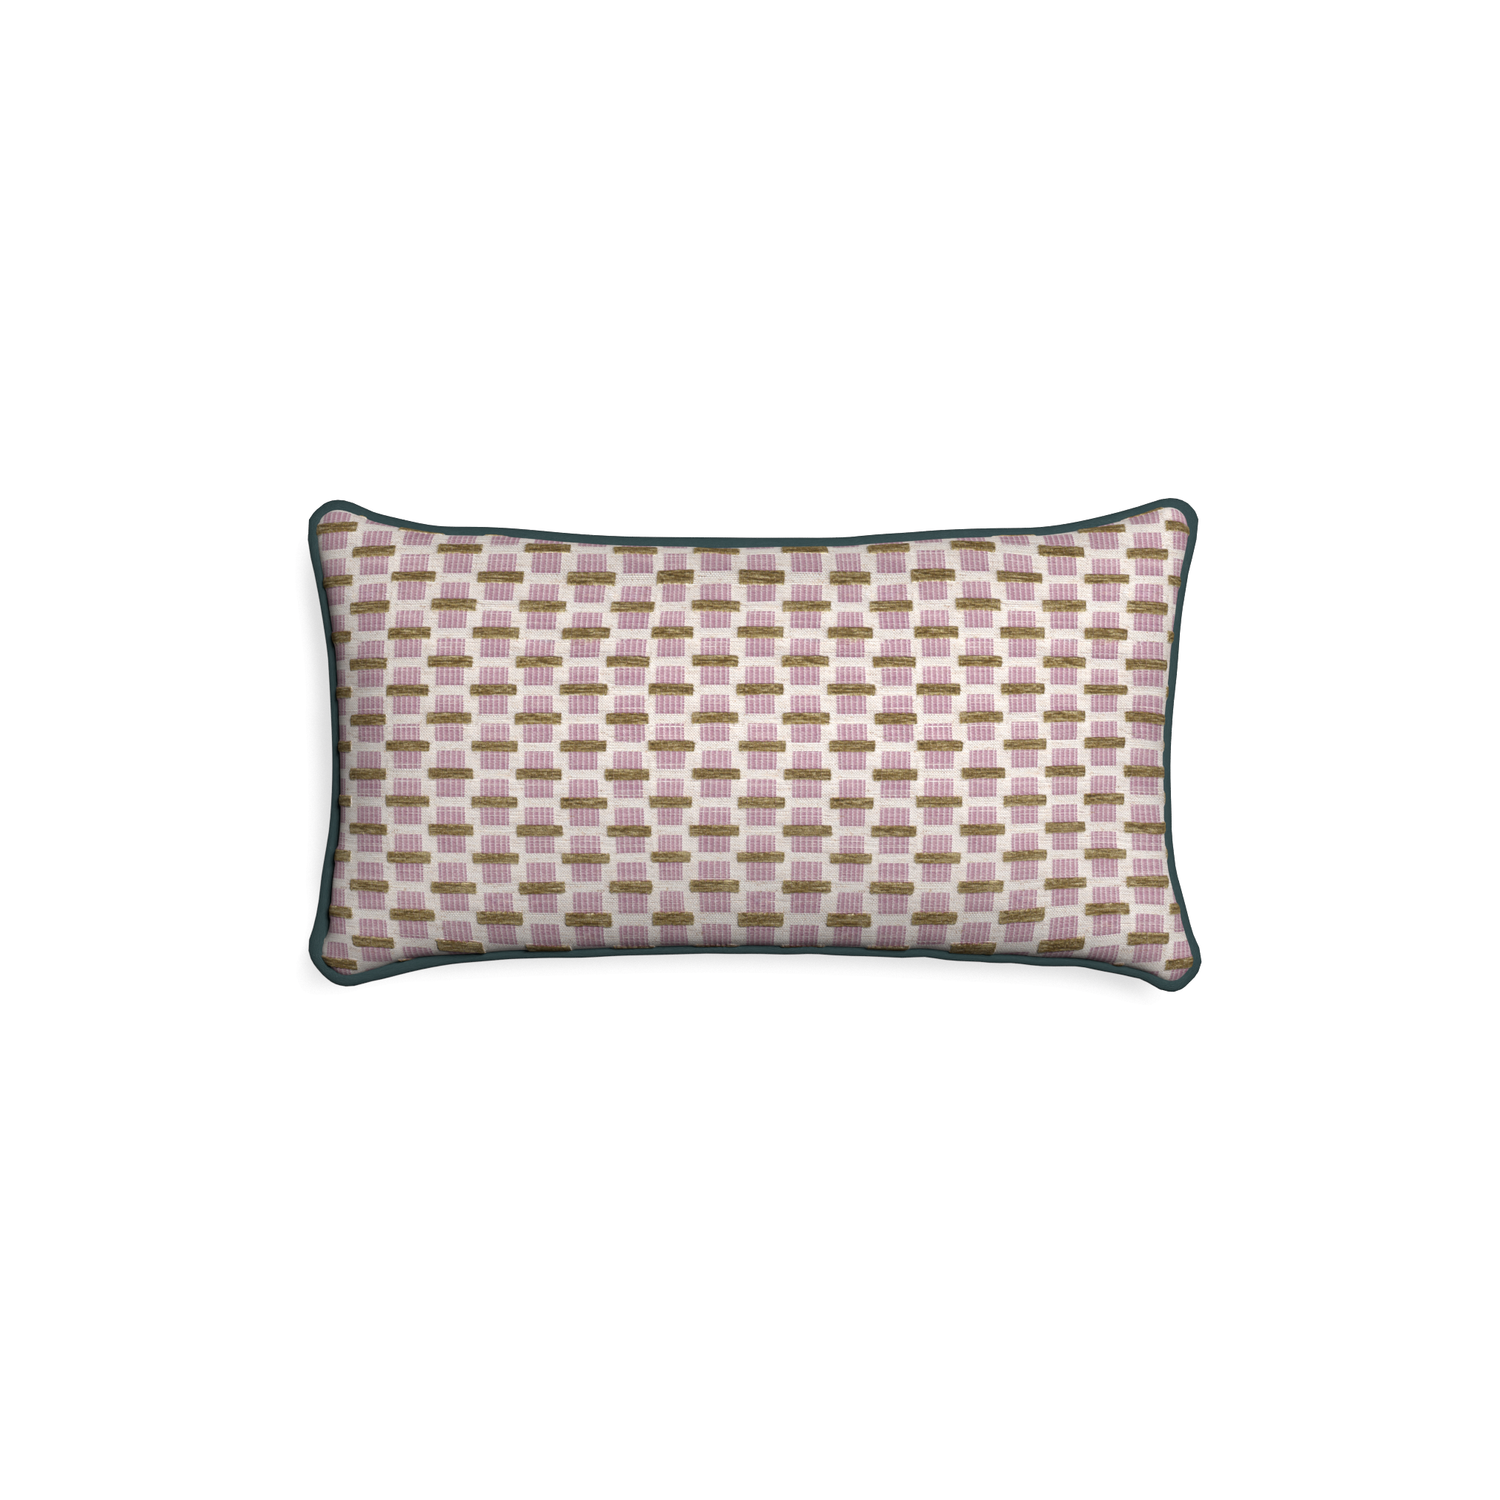 Petite-lumbar willow orchid custom pink geometric chenillepillow with p piping on white background